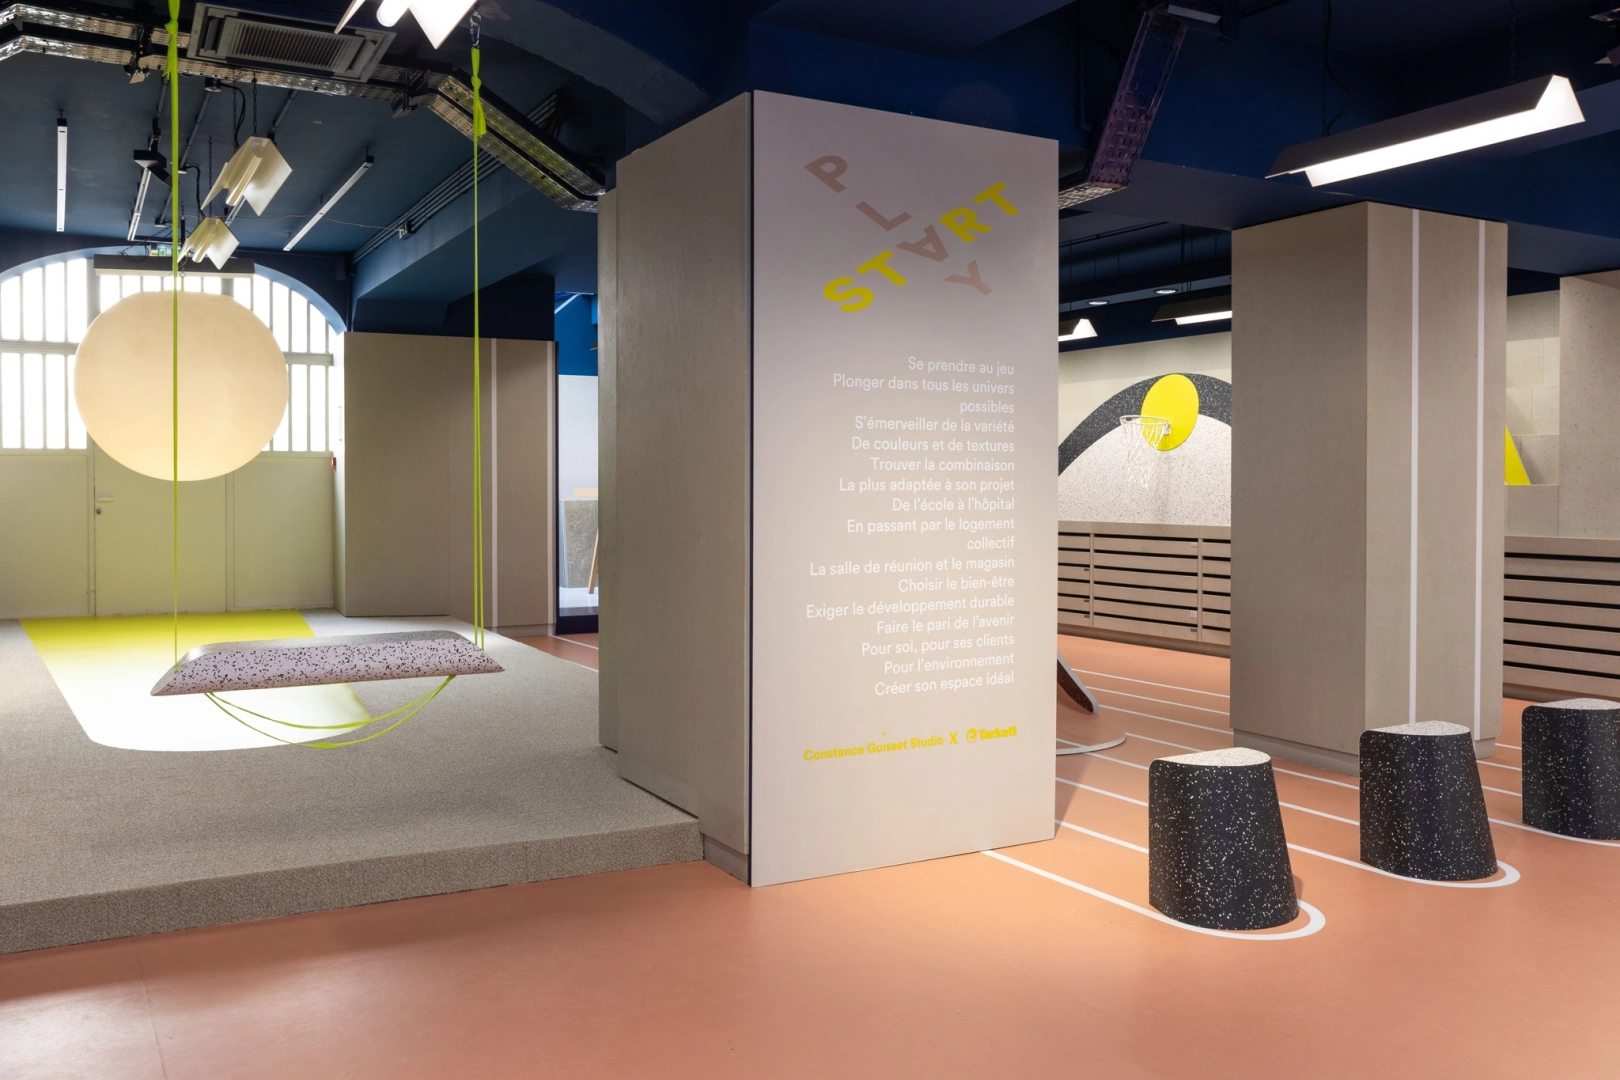 Exhibition at the Tarkett studio in Paris combines playfulness and sustainability